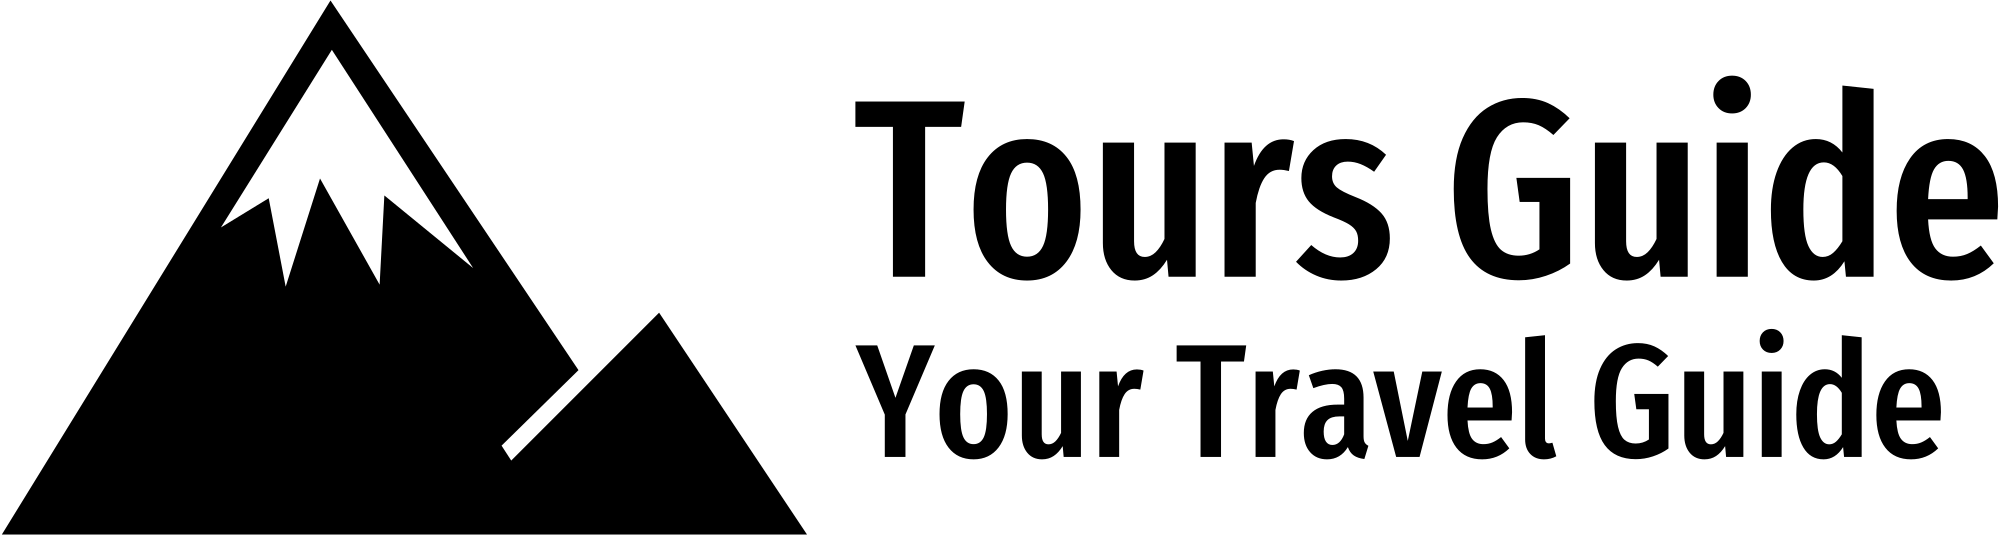 Tours Guide